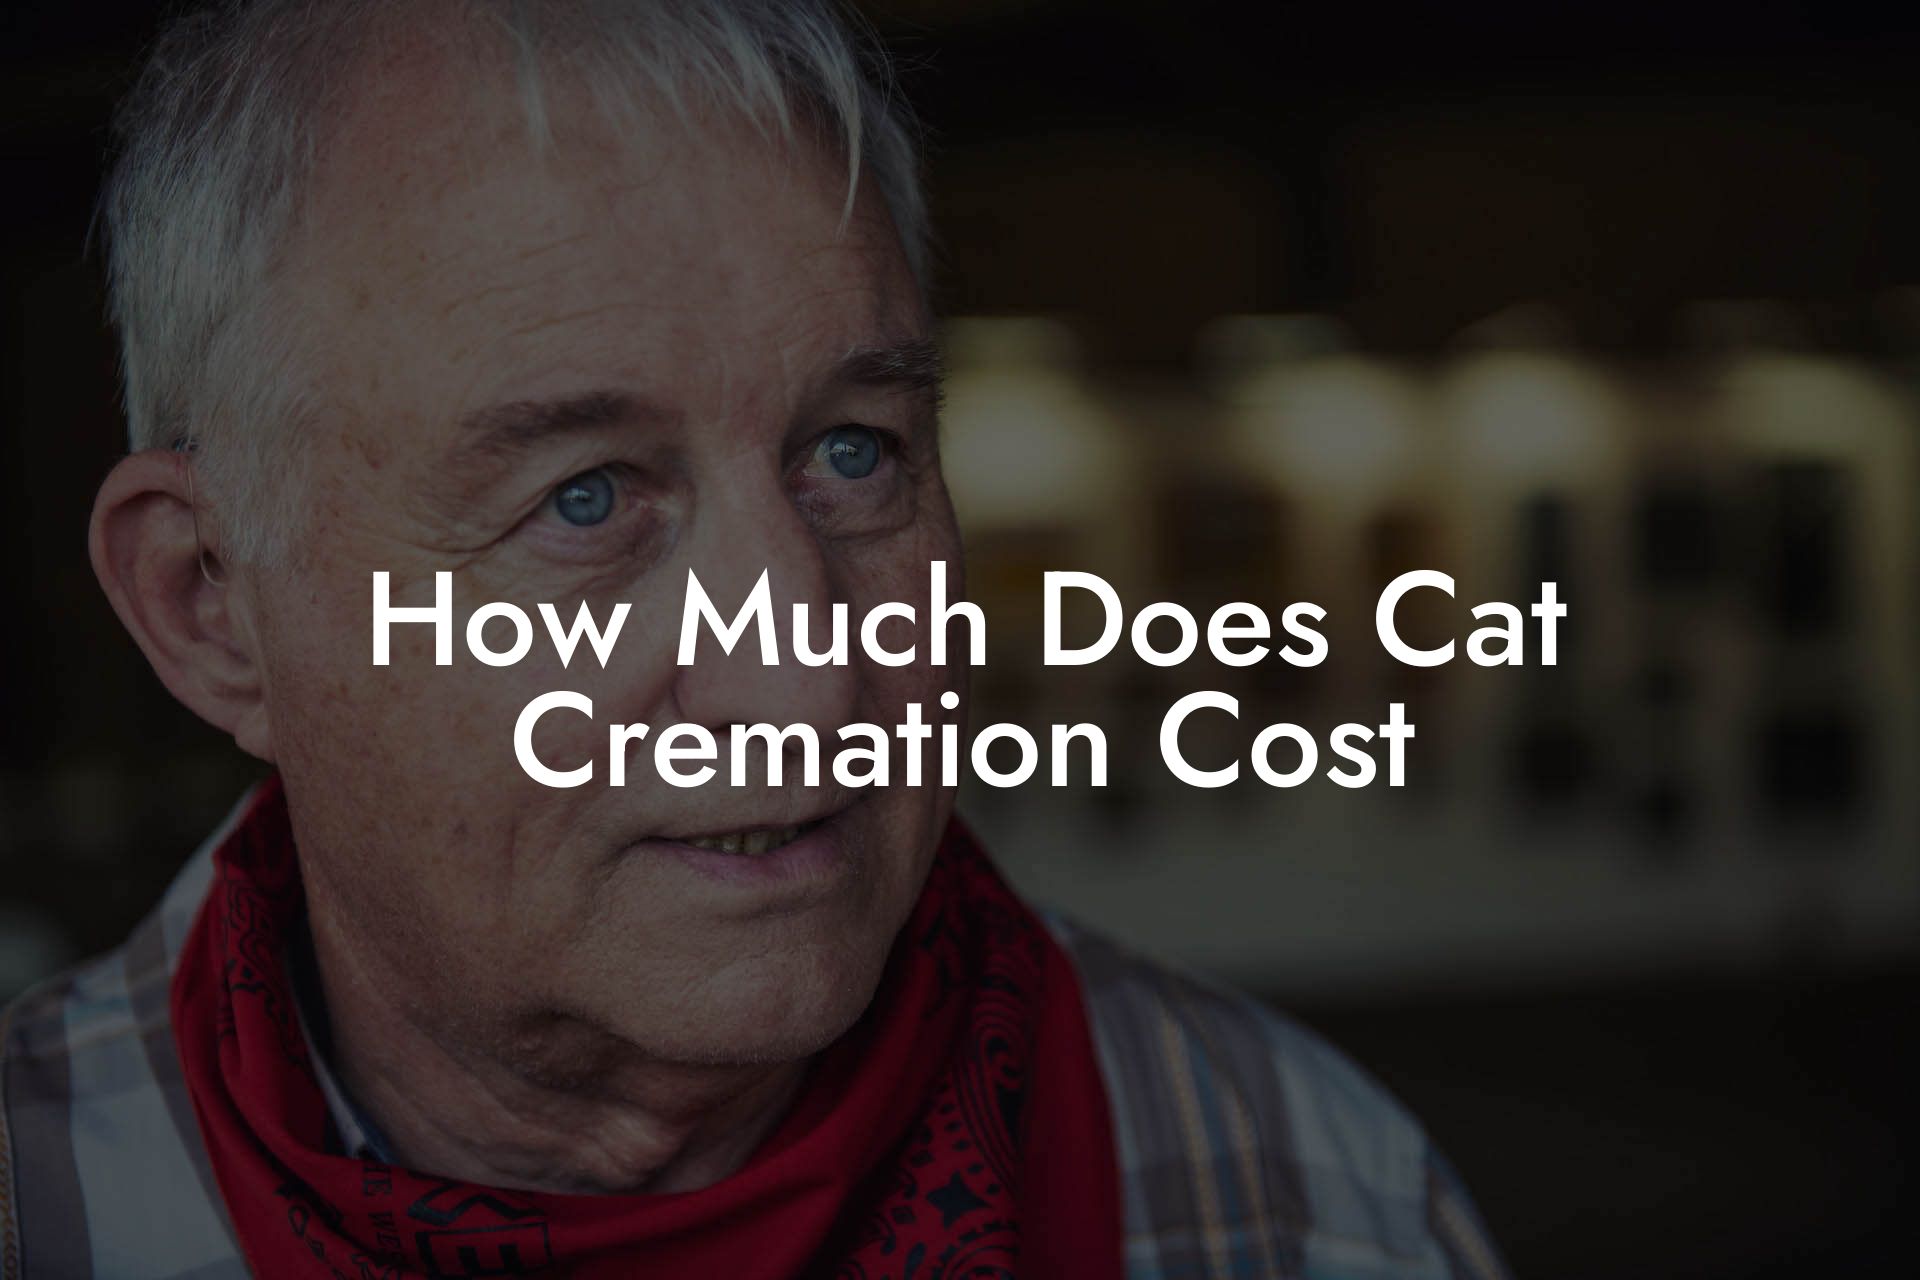 How Much Does Cat Cremation Cost